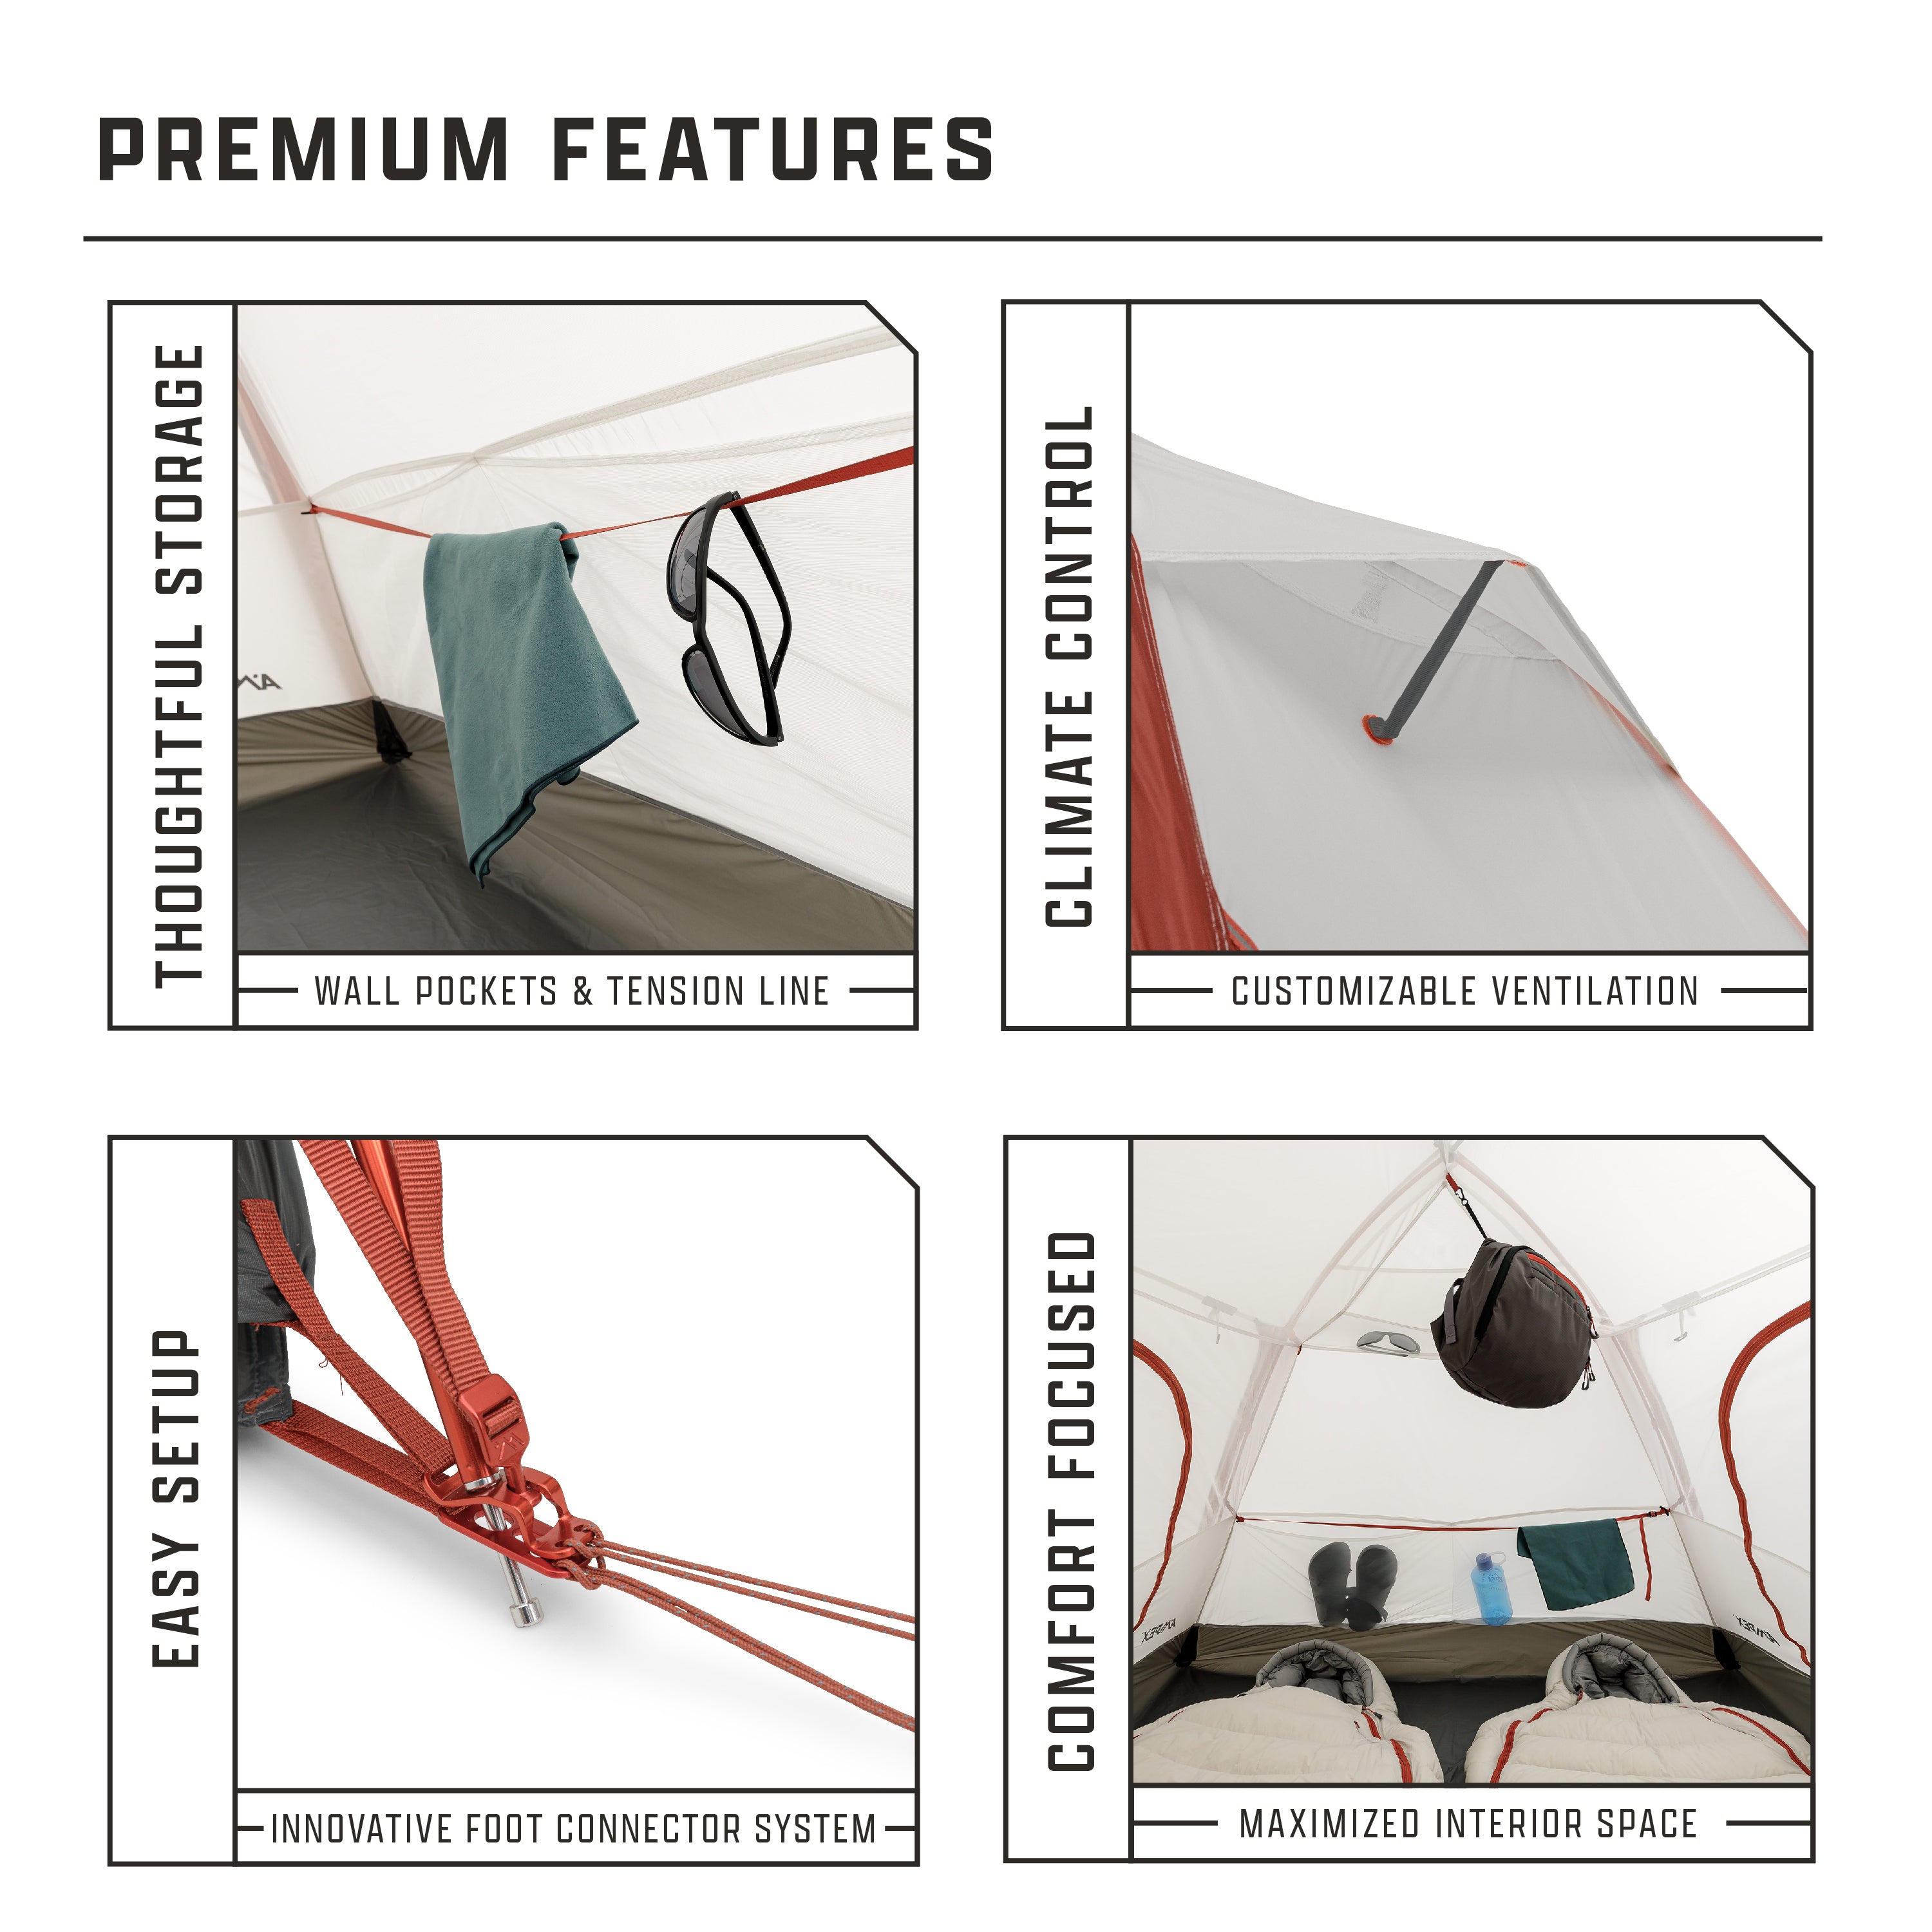 Lightweight Backpacking Tent | 3 Person